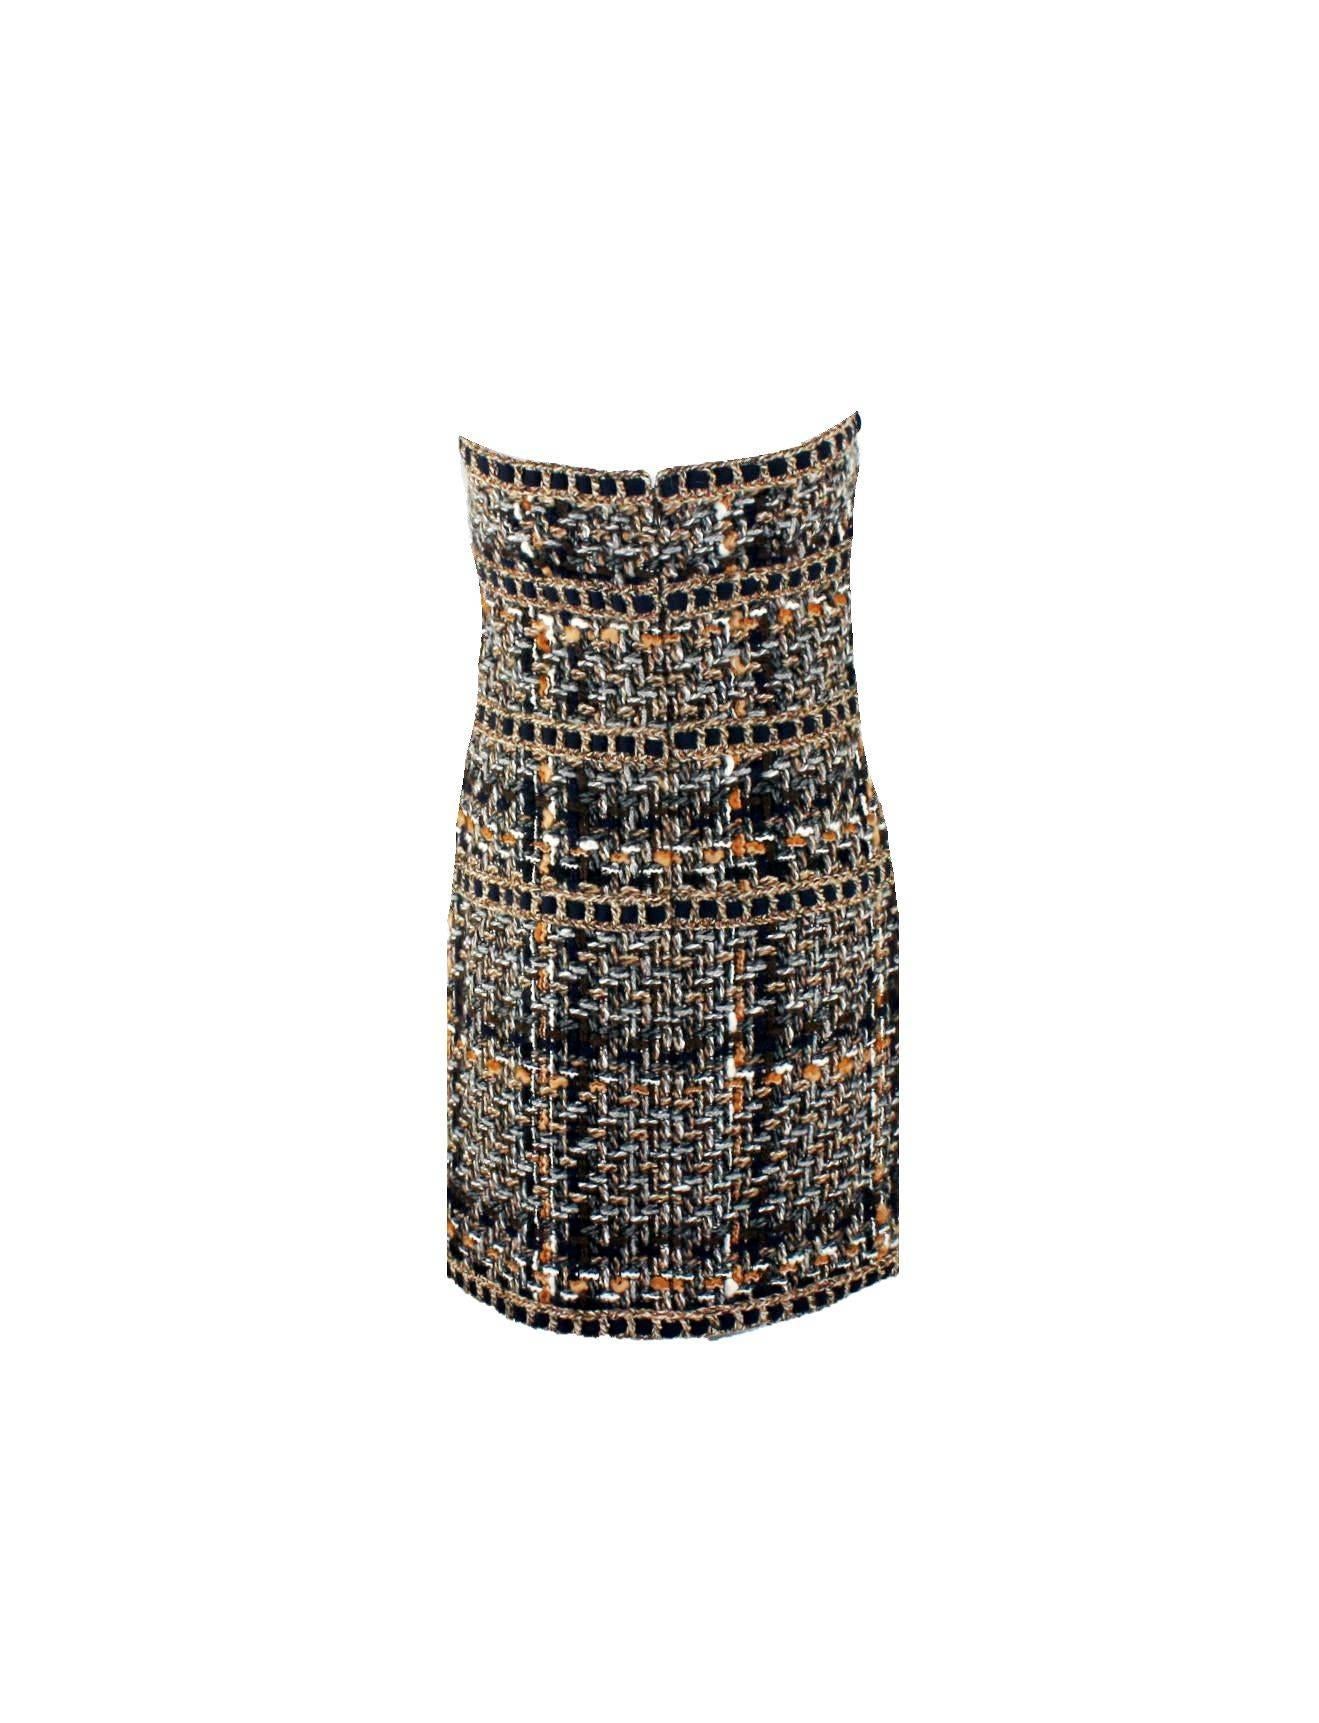 Stunning CHANEL signature tweed dress
Designed by Karl Lagerfeld for Chanel
Beautiful hand-braided details
Finest fantasy tweed fabric exclusively produced for Chanel by Maison Lesage
Fully lined with Chanel CC logo silk
Rubber band inside for a